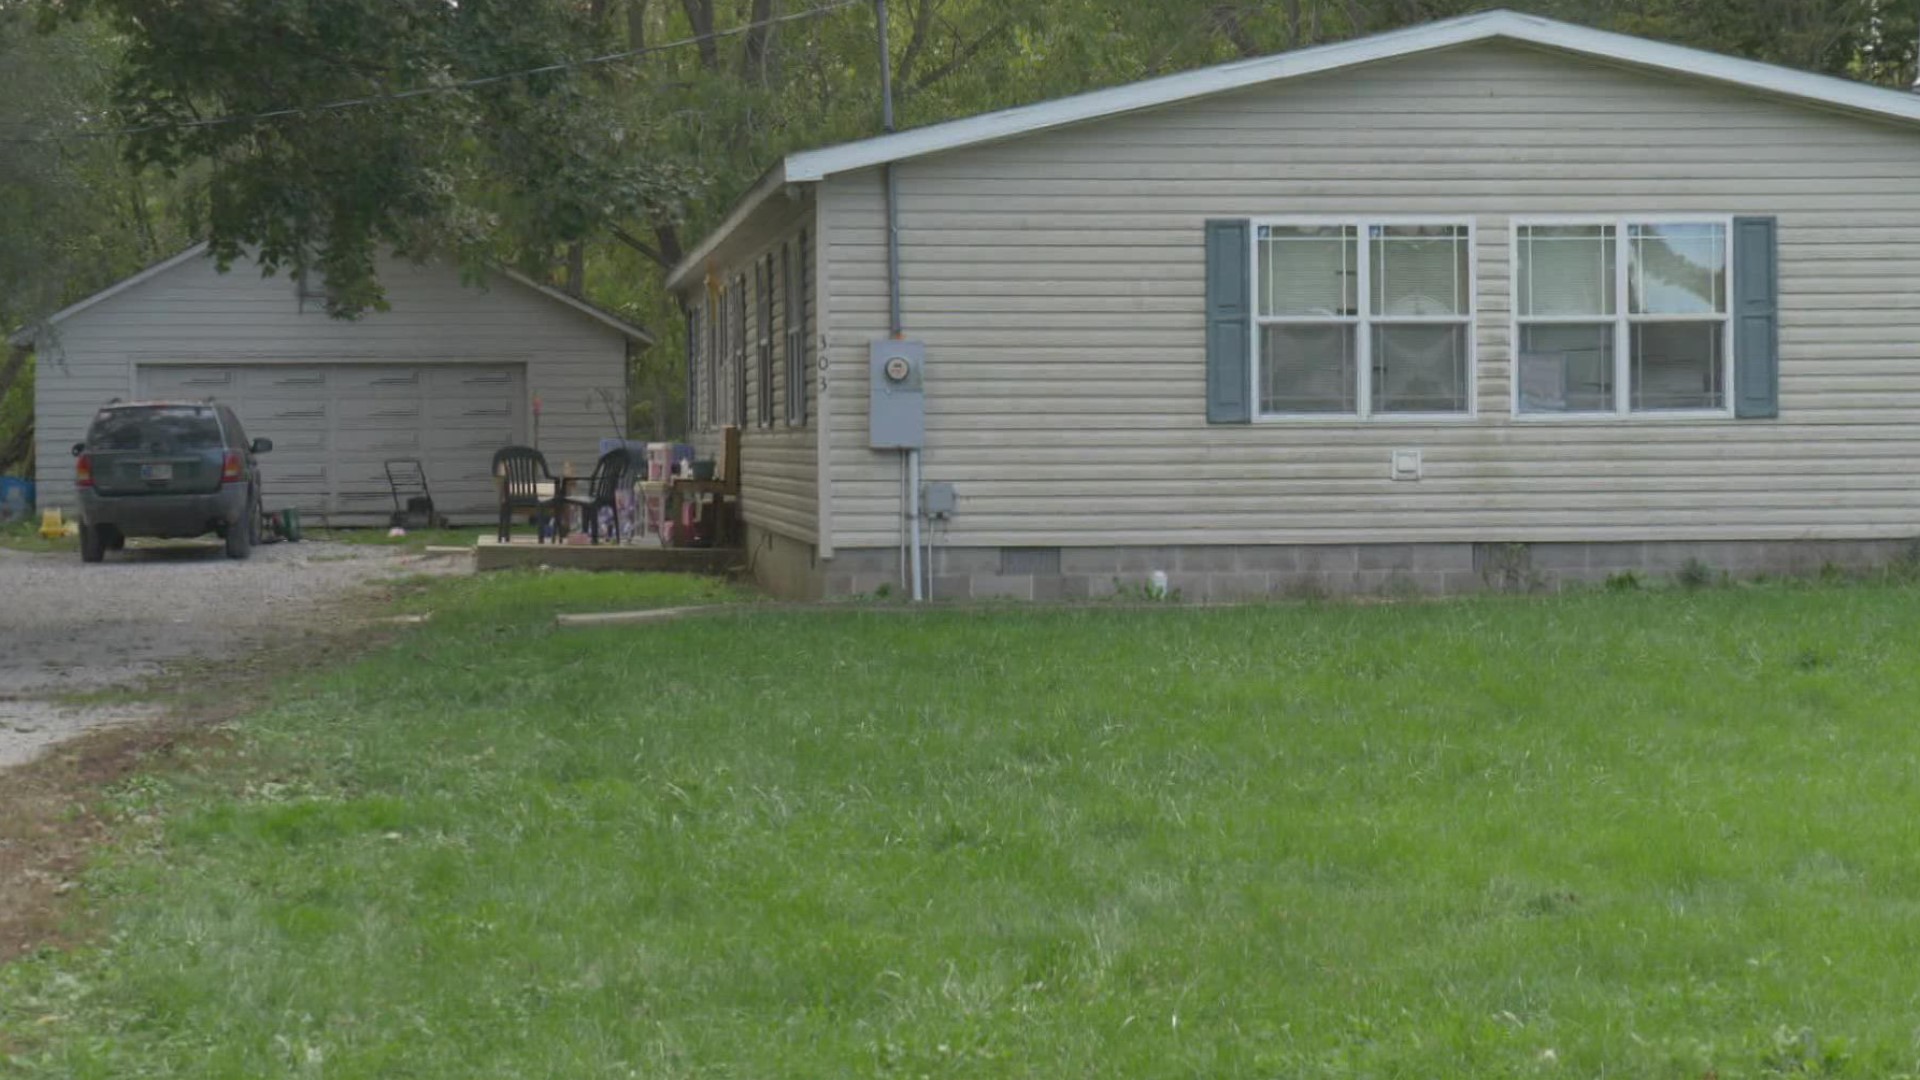 The incident happened Tuesday at a home in Matthews, Indiana.